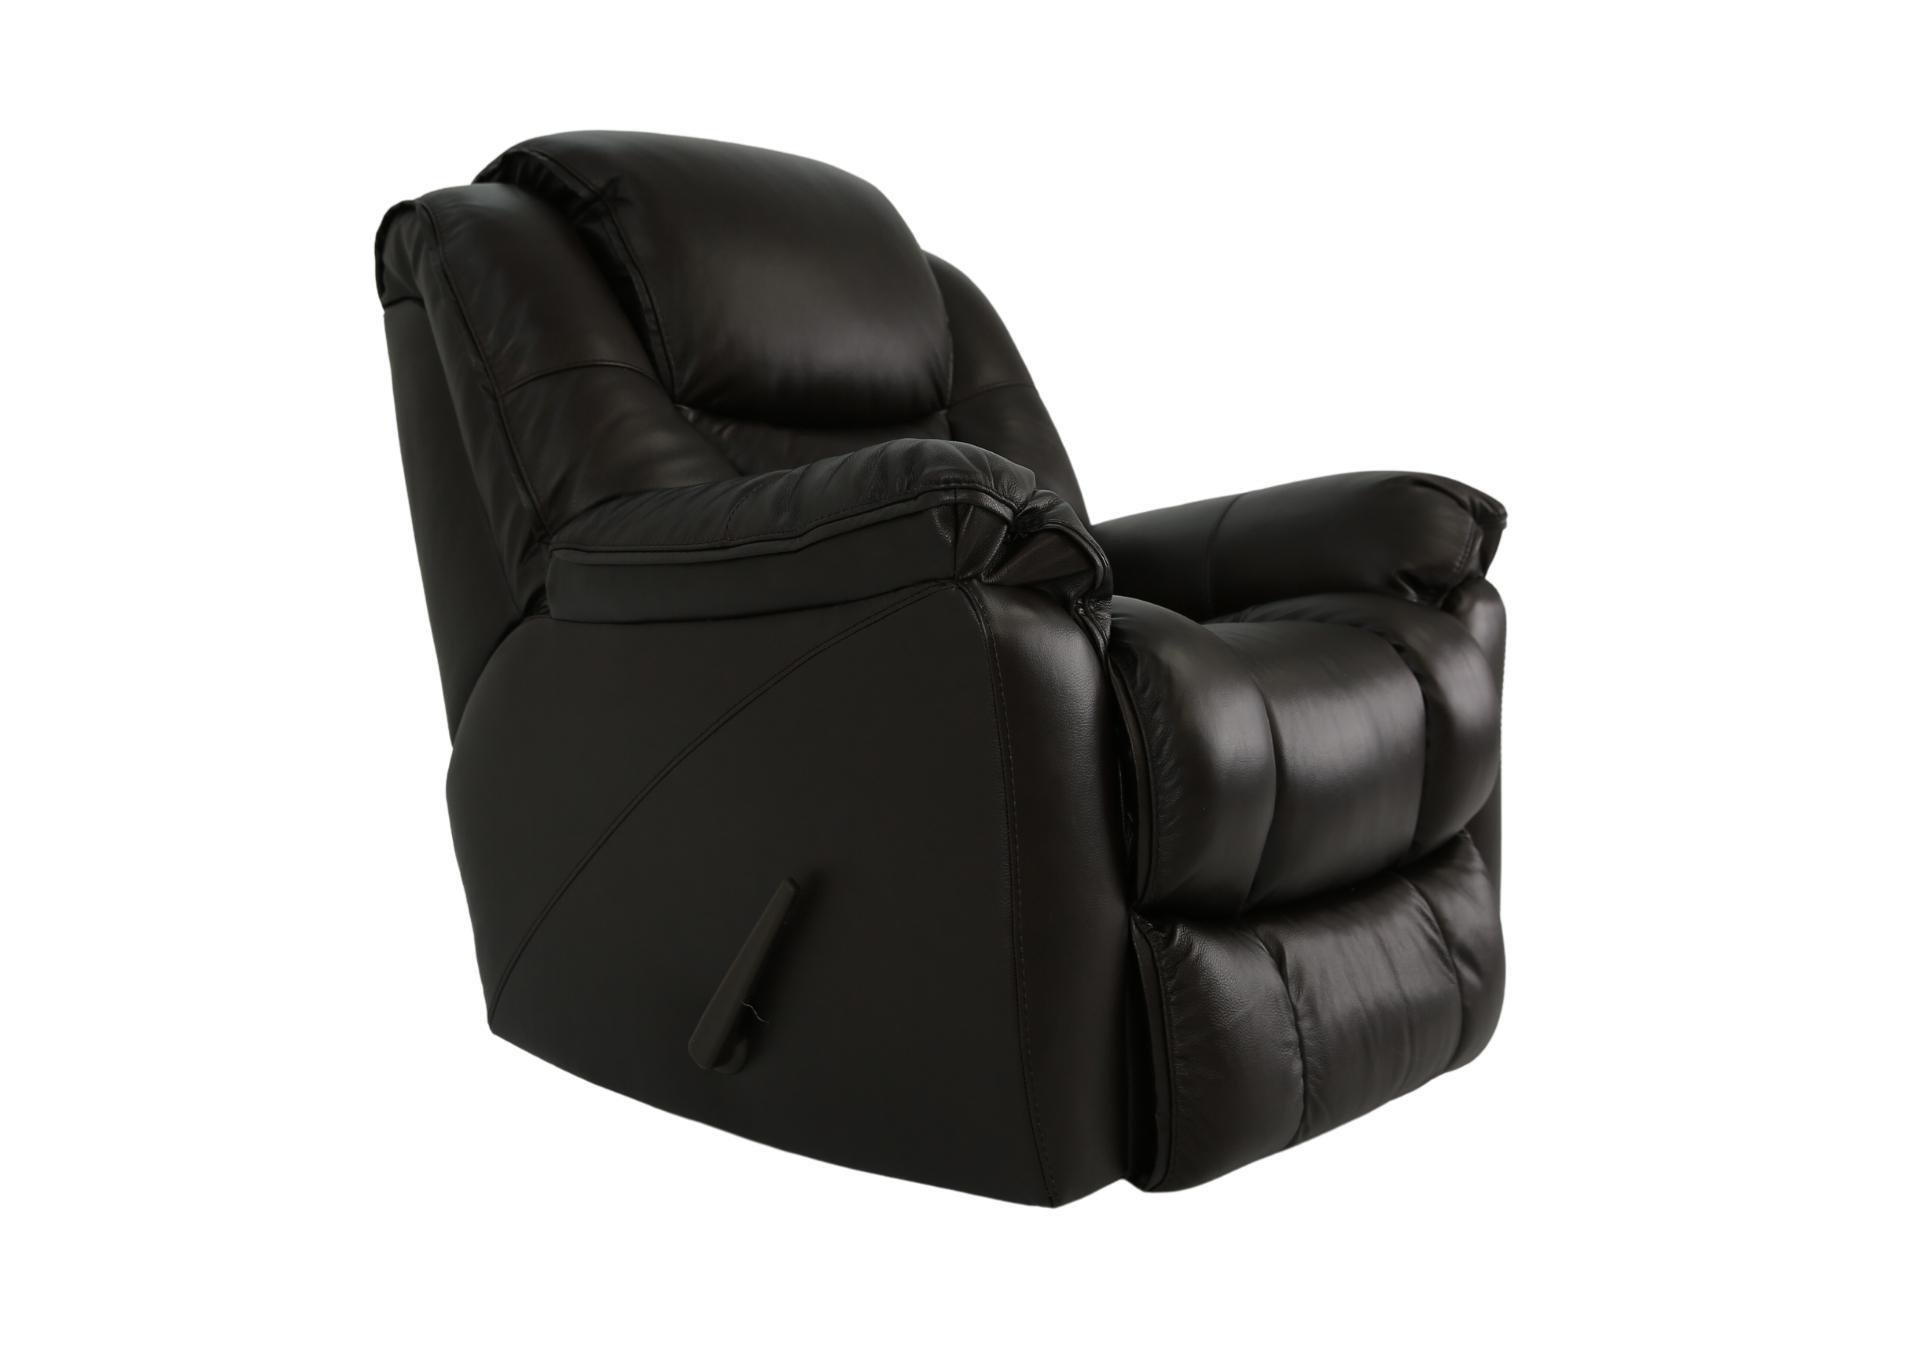 MUSTANG COFFEE LEATHER ROCKER RECLINER,HOMESTRETCH